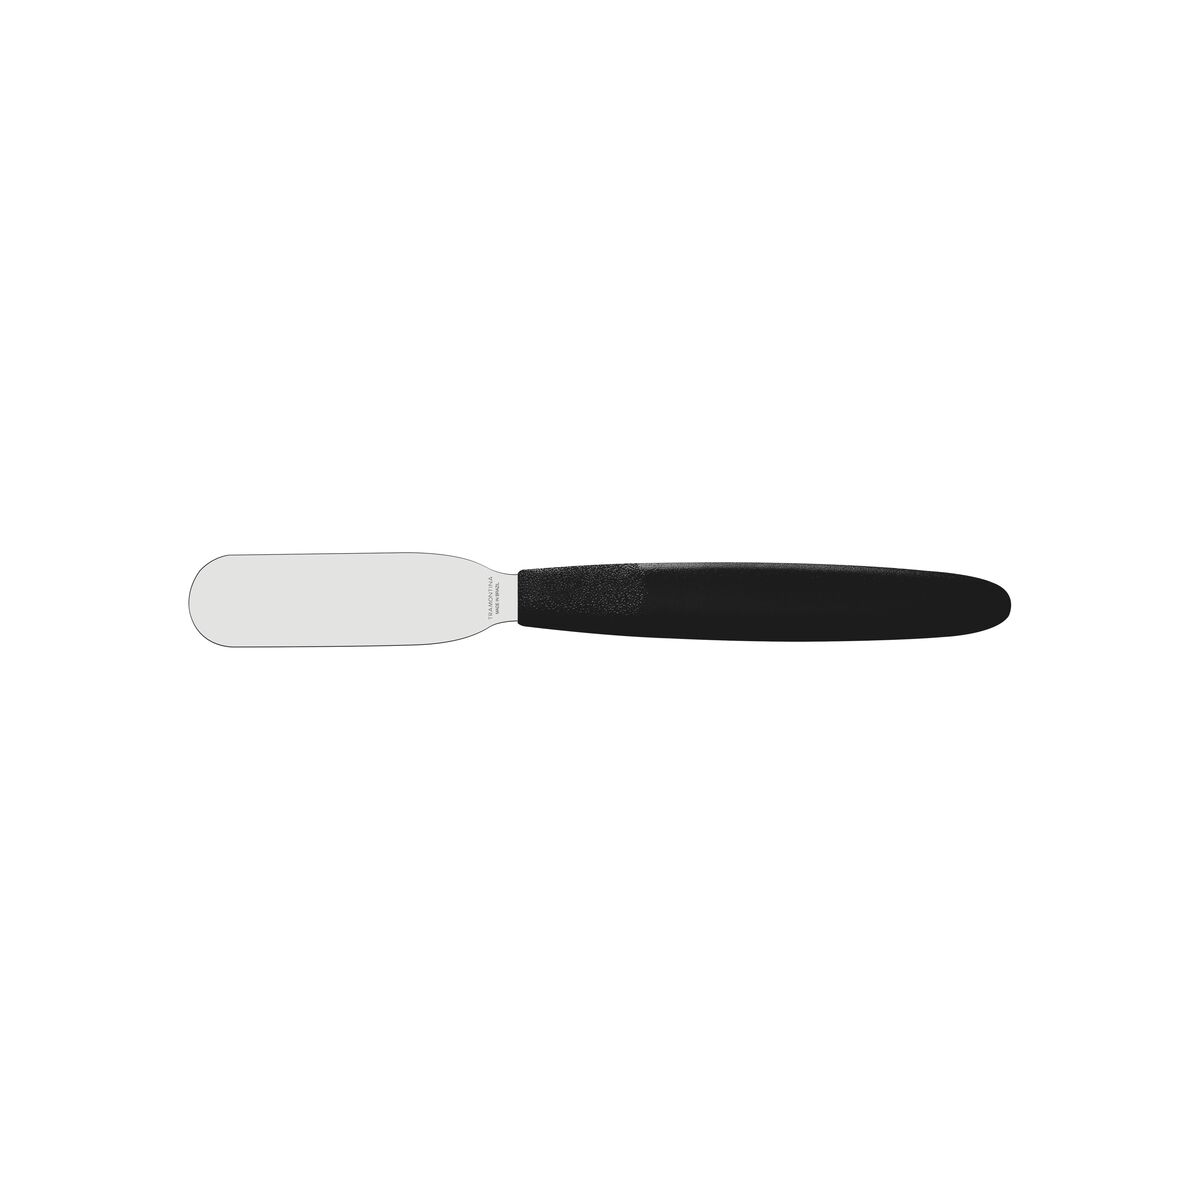 Tramontina Ipanema stainless steel butter spreader with black polypropylene handle, 2"